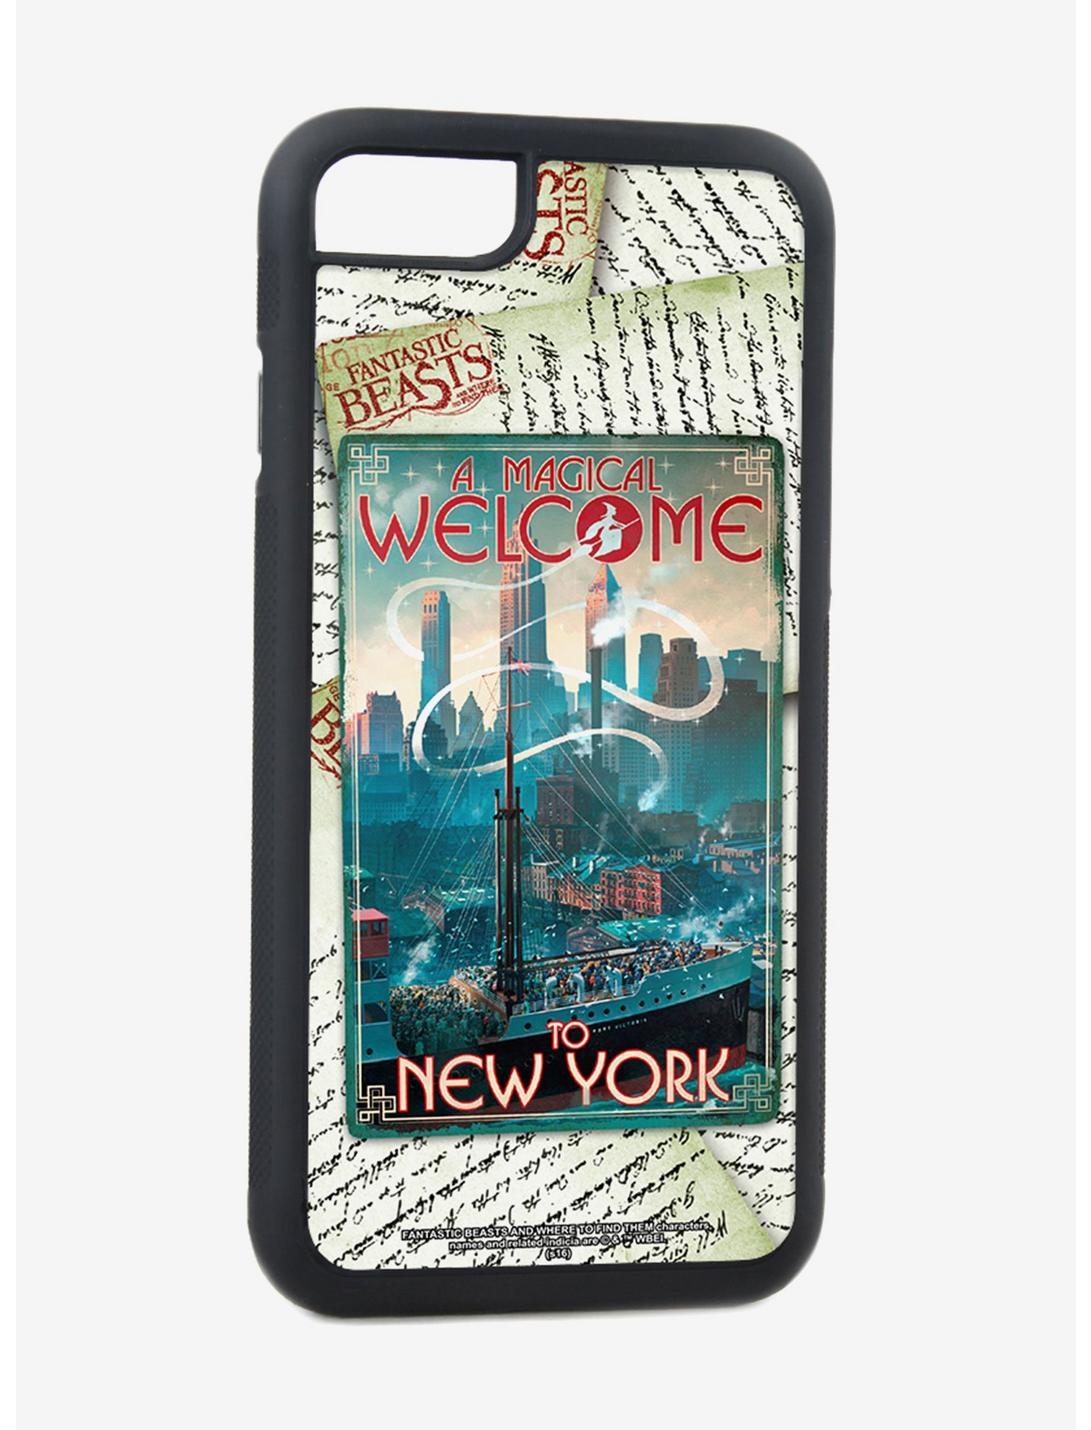 Fantastic Beasts Post Card A Magical Welcome To New York iPhone X Rubber Cell Phone Case, , hi-res